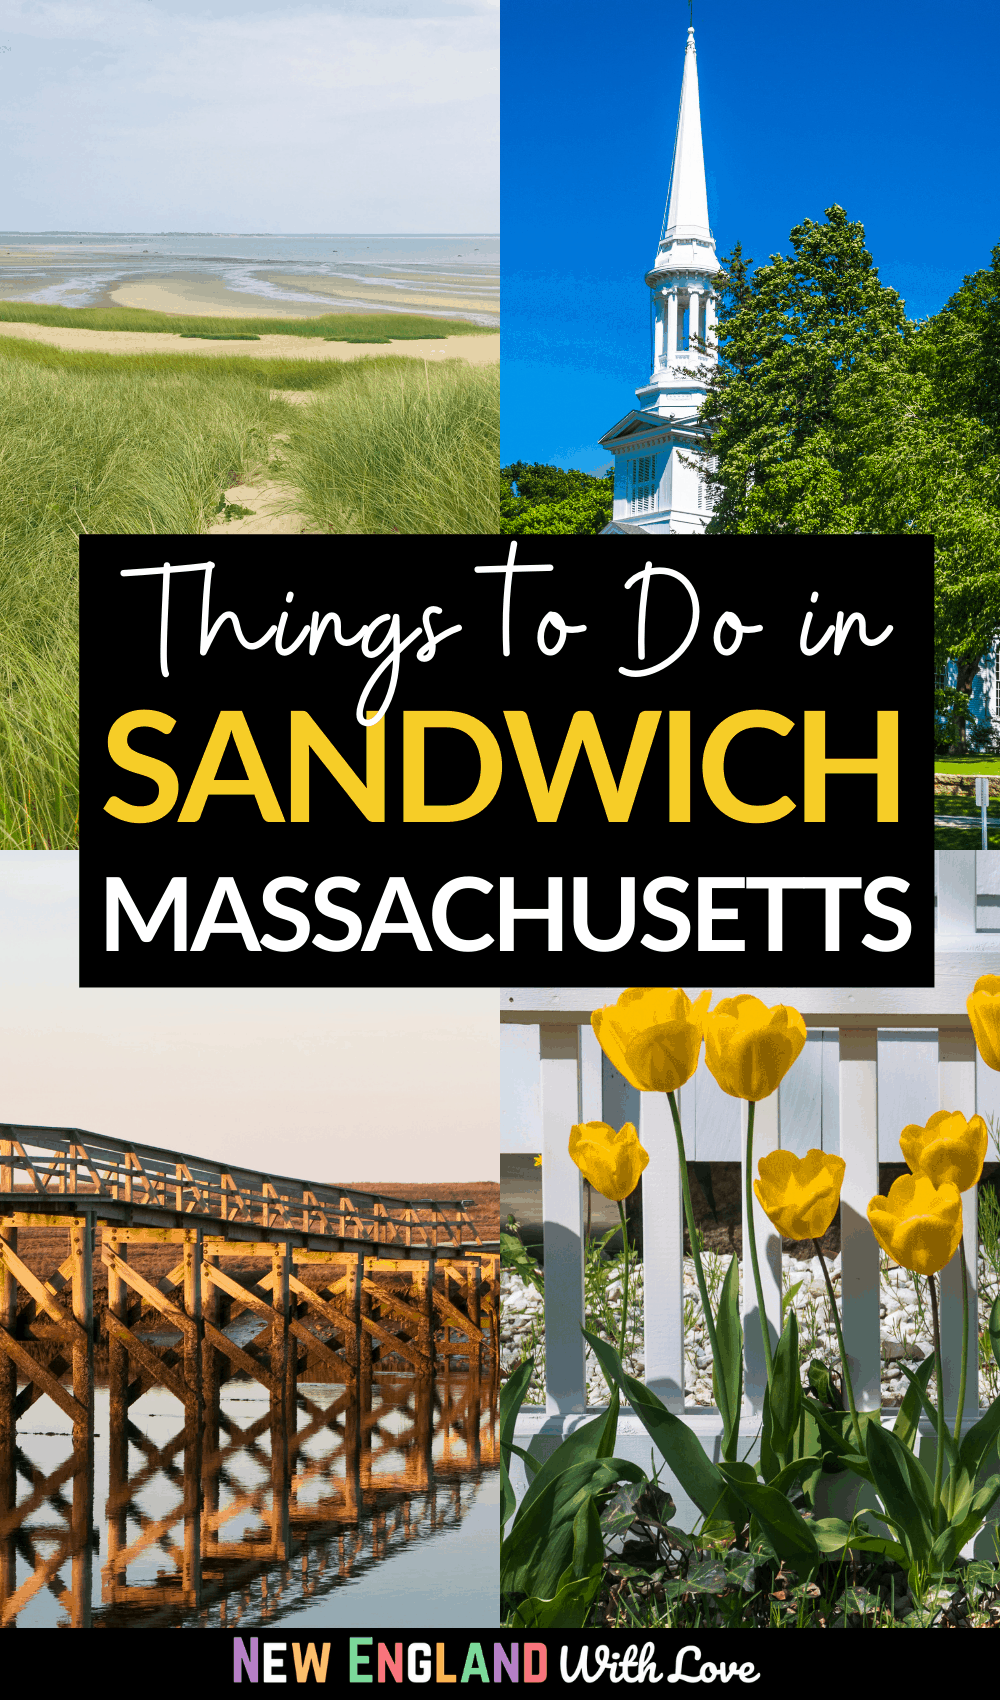 Pinterest graphic reading "Things to Do in SANDWICH MASSACHUSETTS"